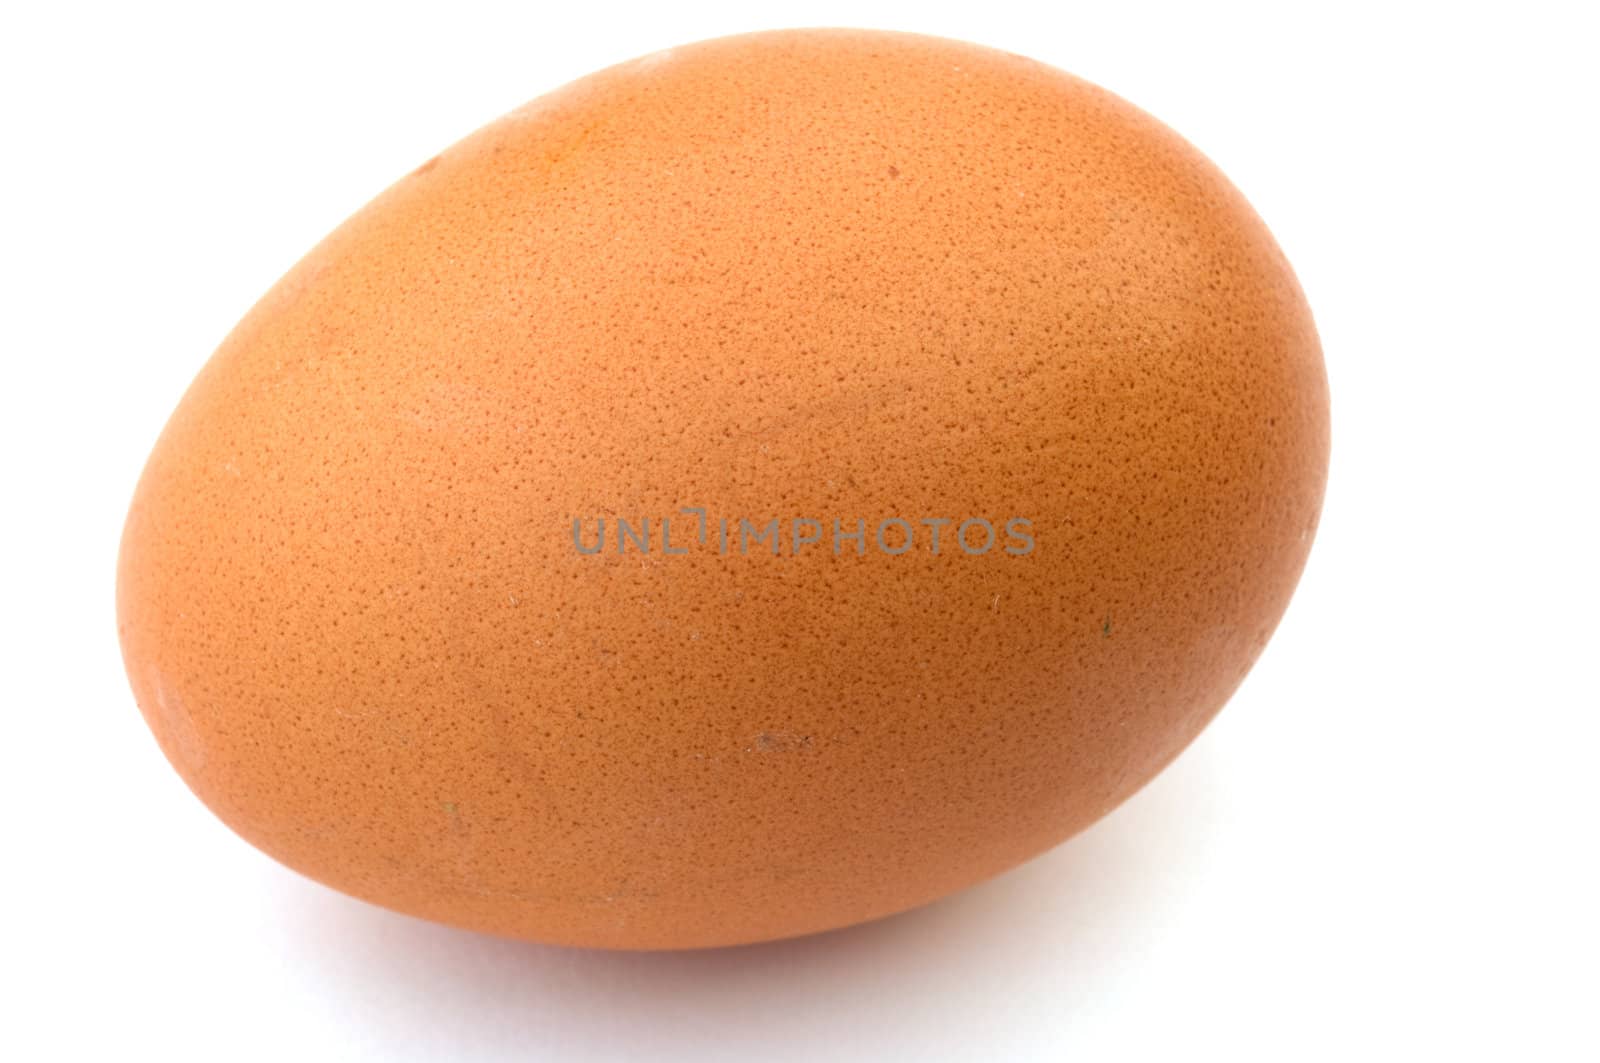 Brown egg on a white background a close up.